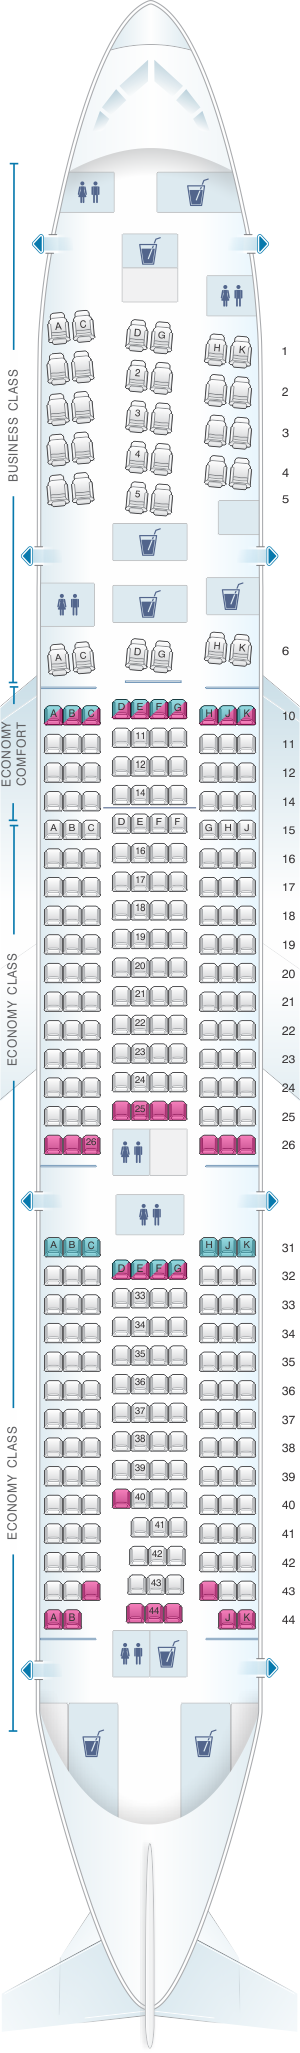 klm seat assignment fee